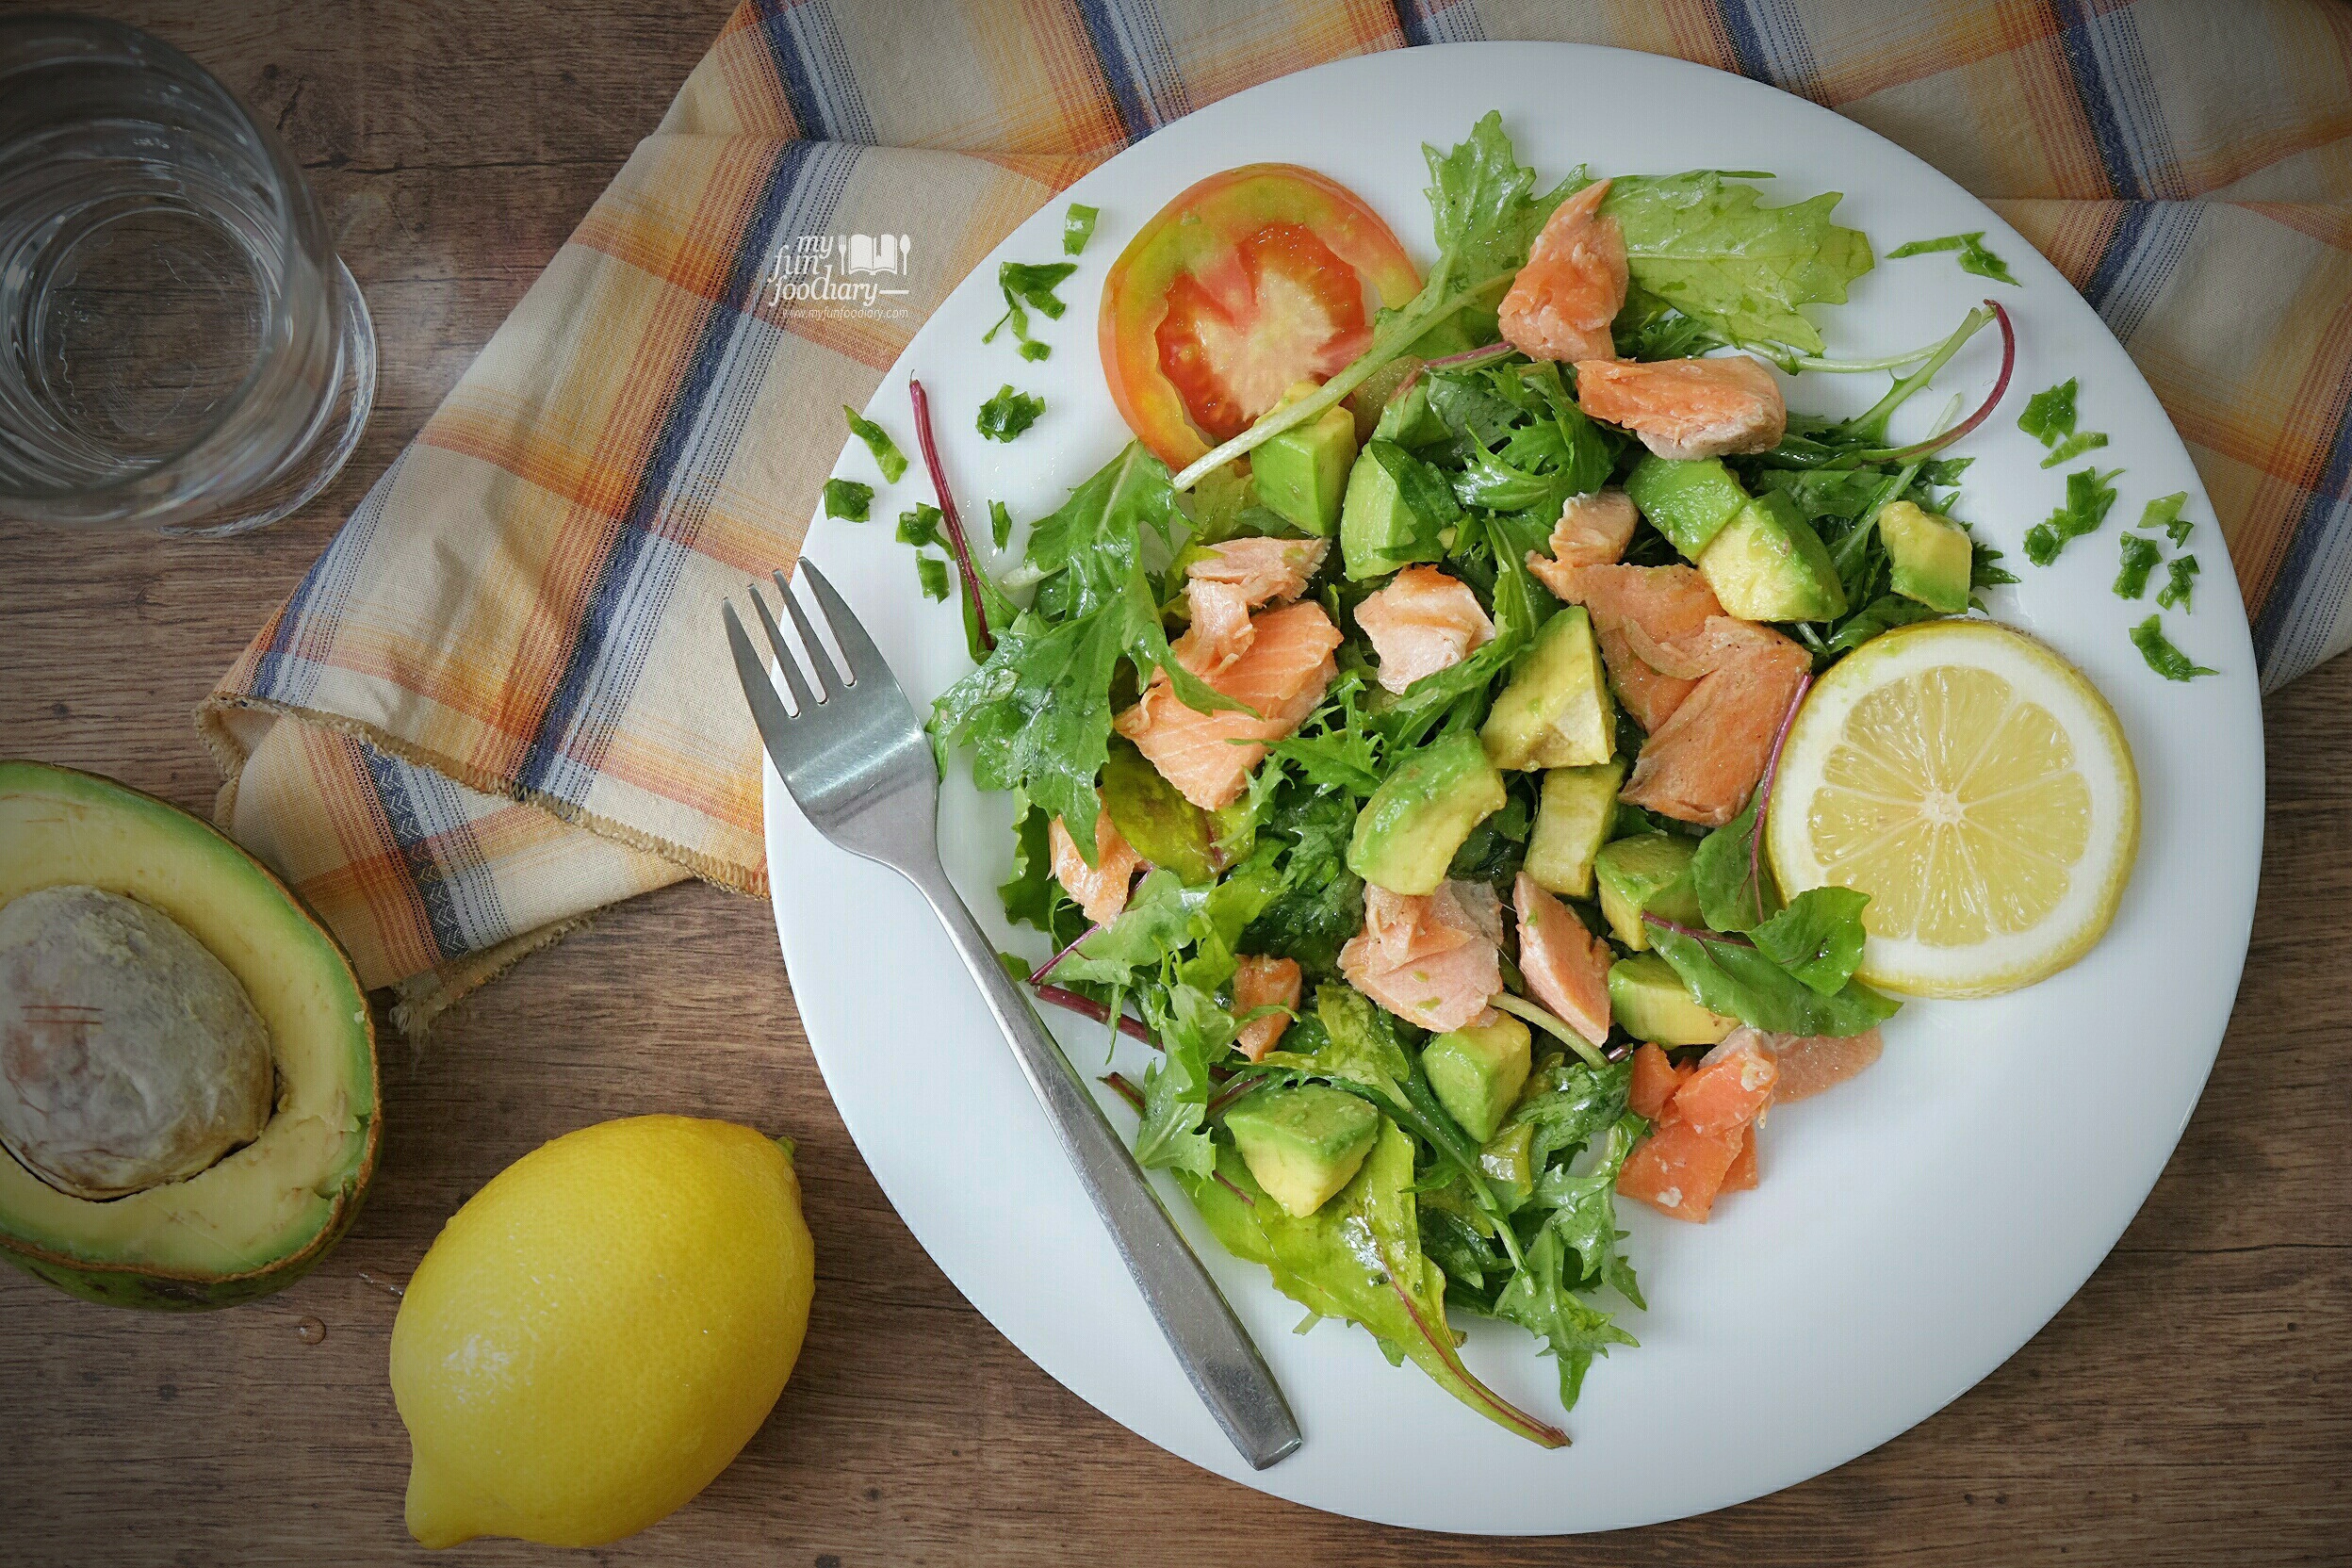 Pan Seared Salmon Salad with Lemon Dressing at home by Myfunfoodiary 02